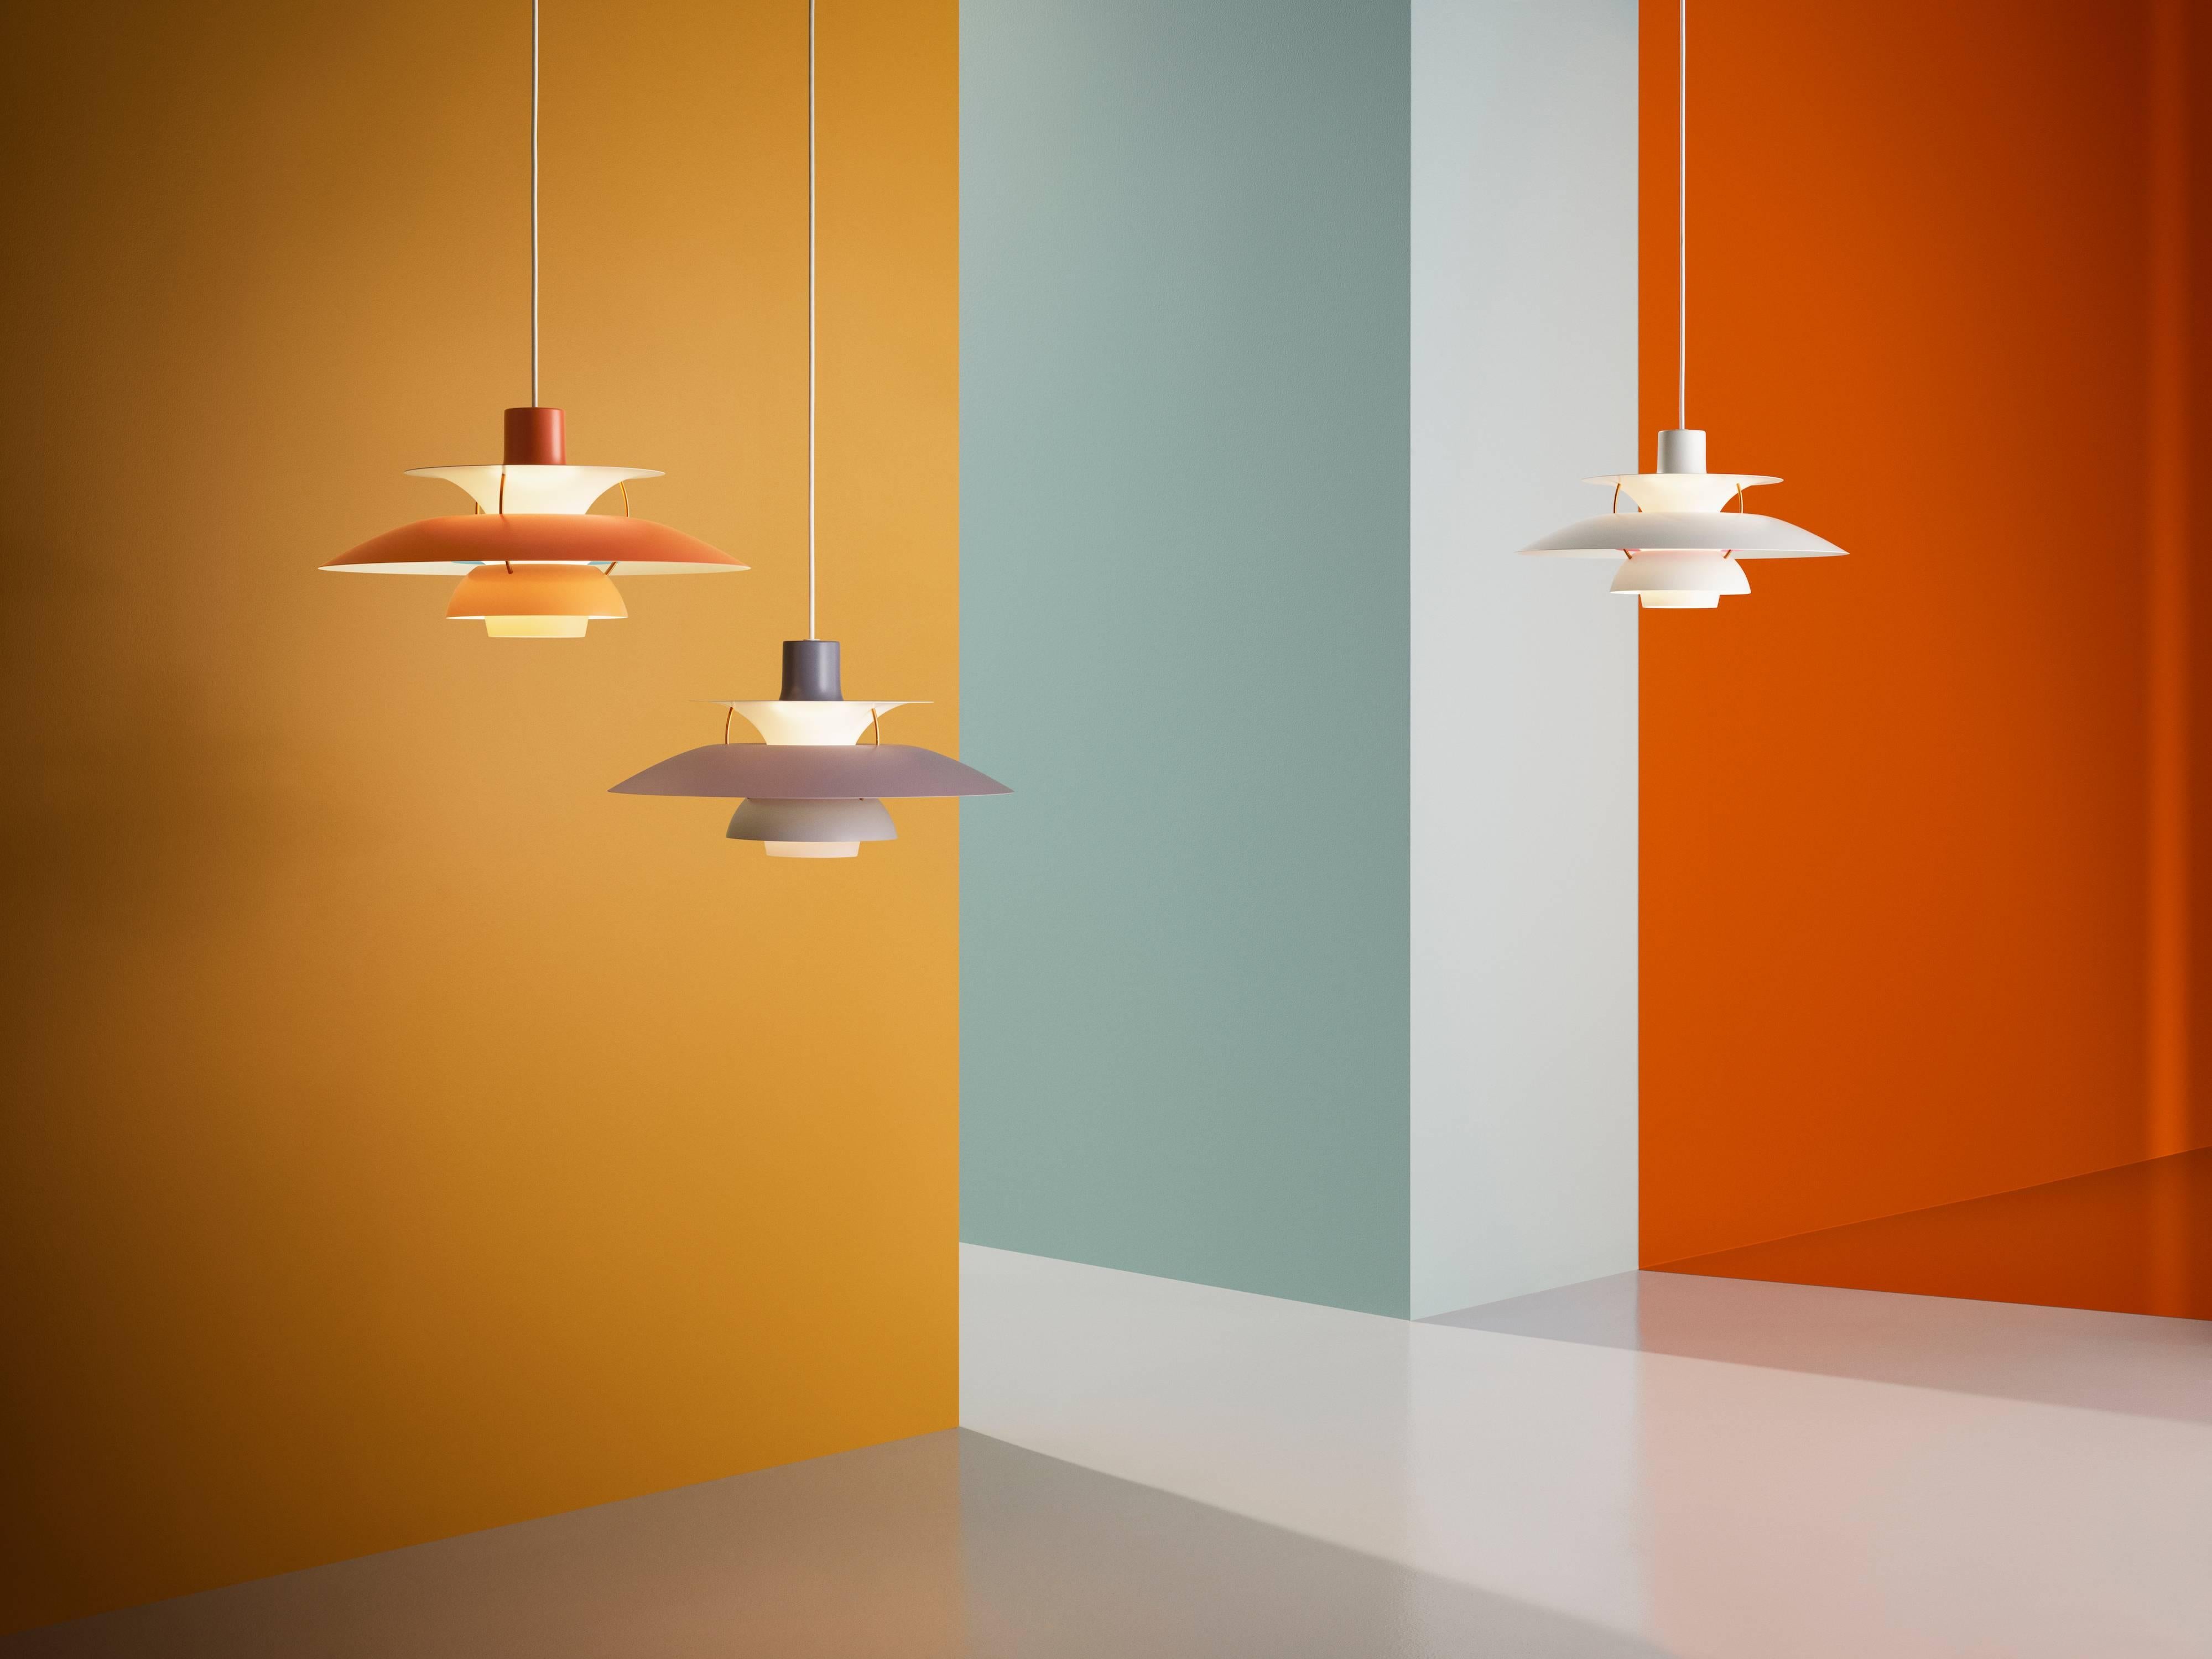 Poul Henningsen PH 5 pendant for Louis Poulsen in orange. Poul Henningsen introduced his iconic PH 5 pendant light in 1958. Six decades later, the PH 5 remains the bestselling design in the Louis Poulsen's portfolio. The PH 5's painted metal shades